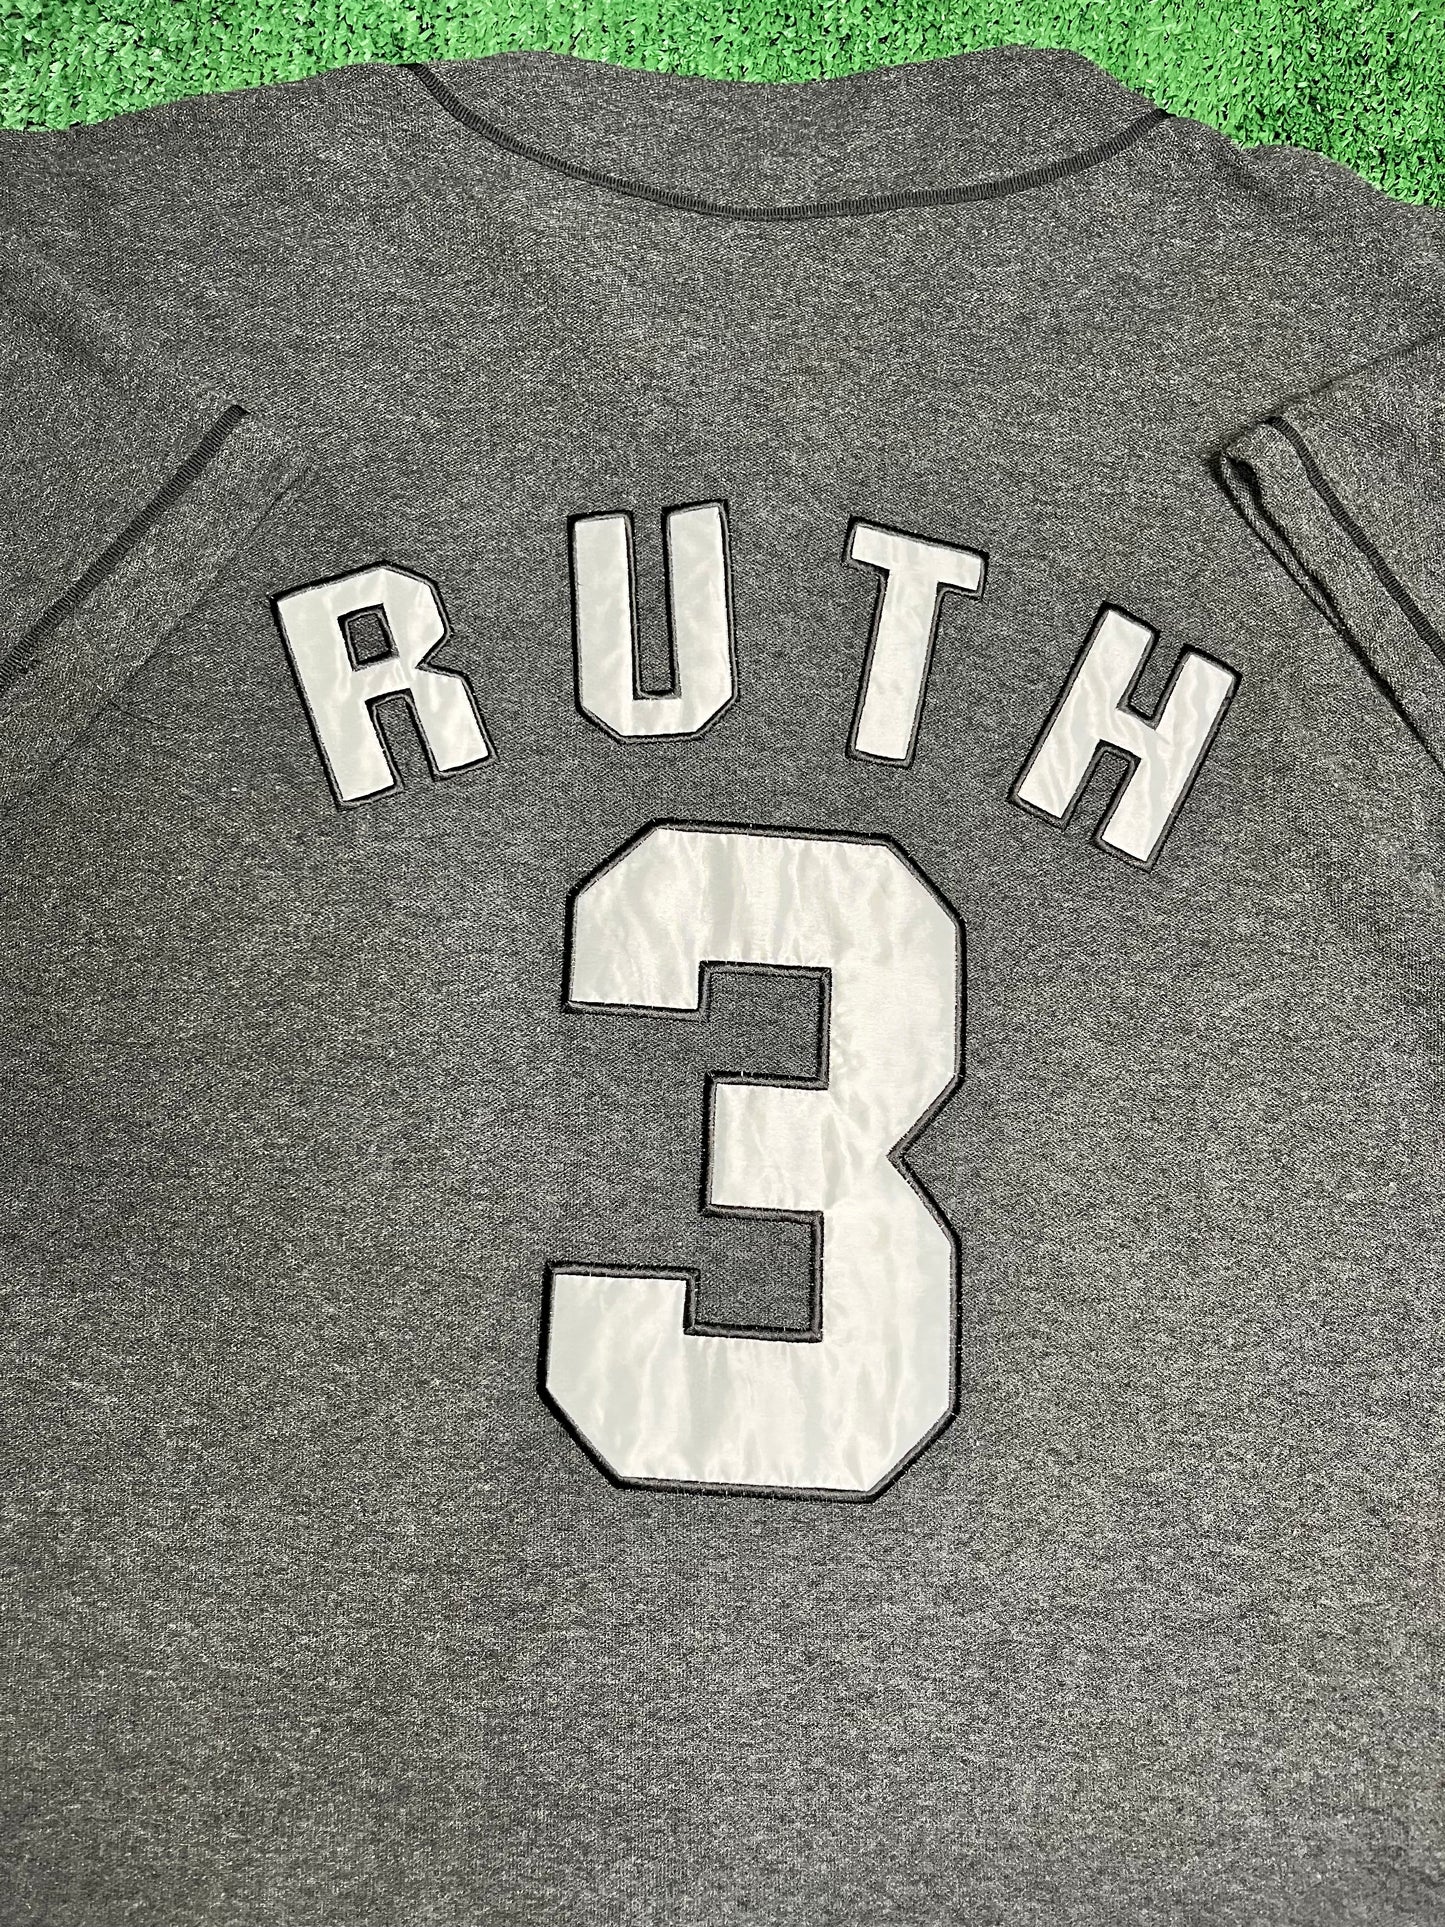 Babe Ruth Jersey